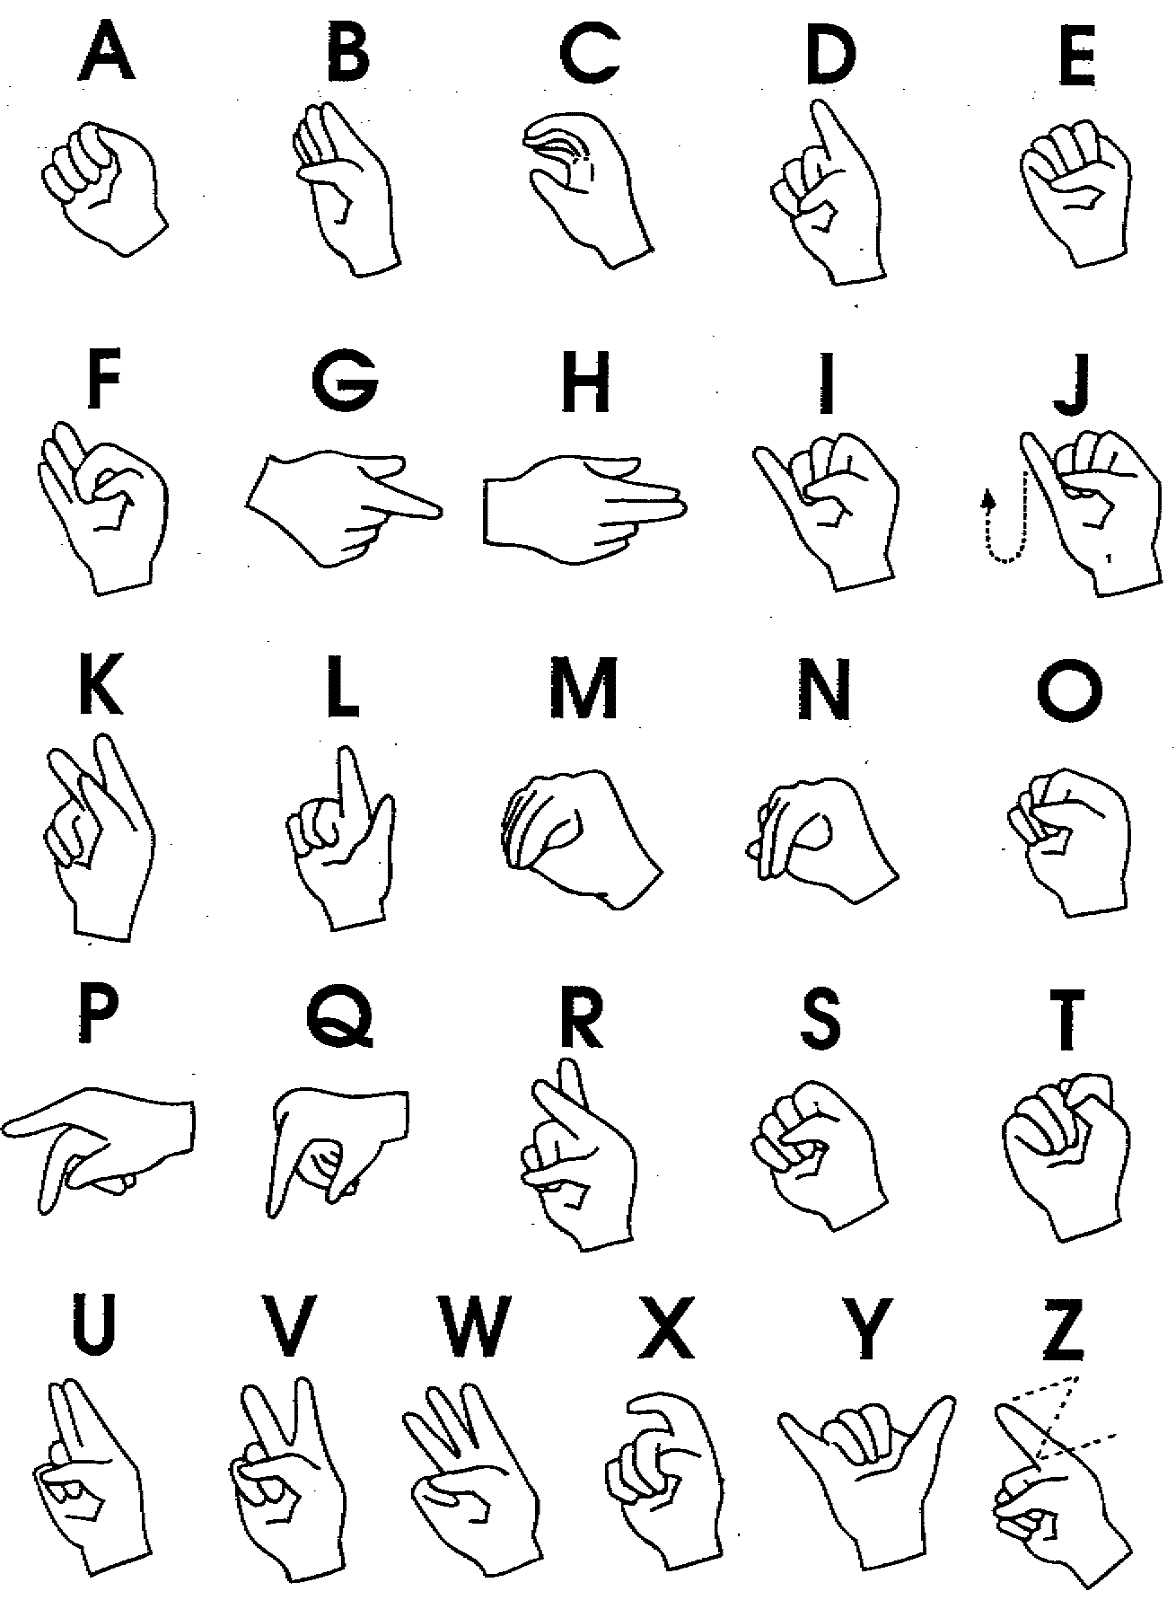 sign-language-images-printable-activity-shelter